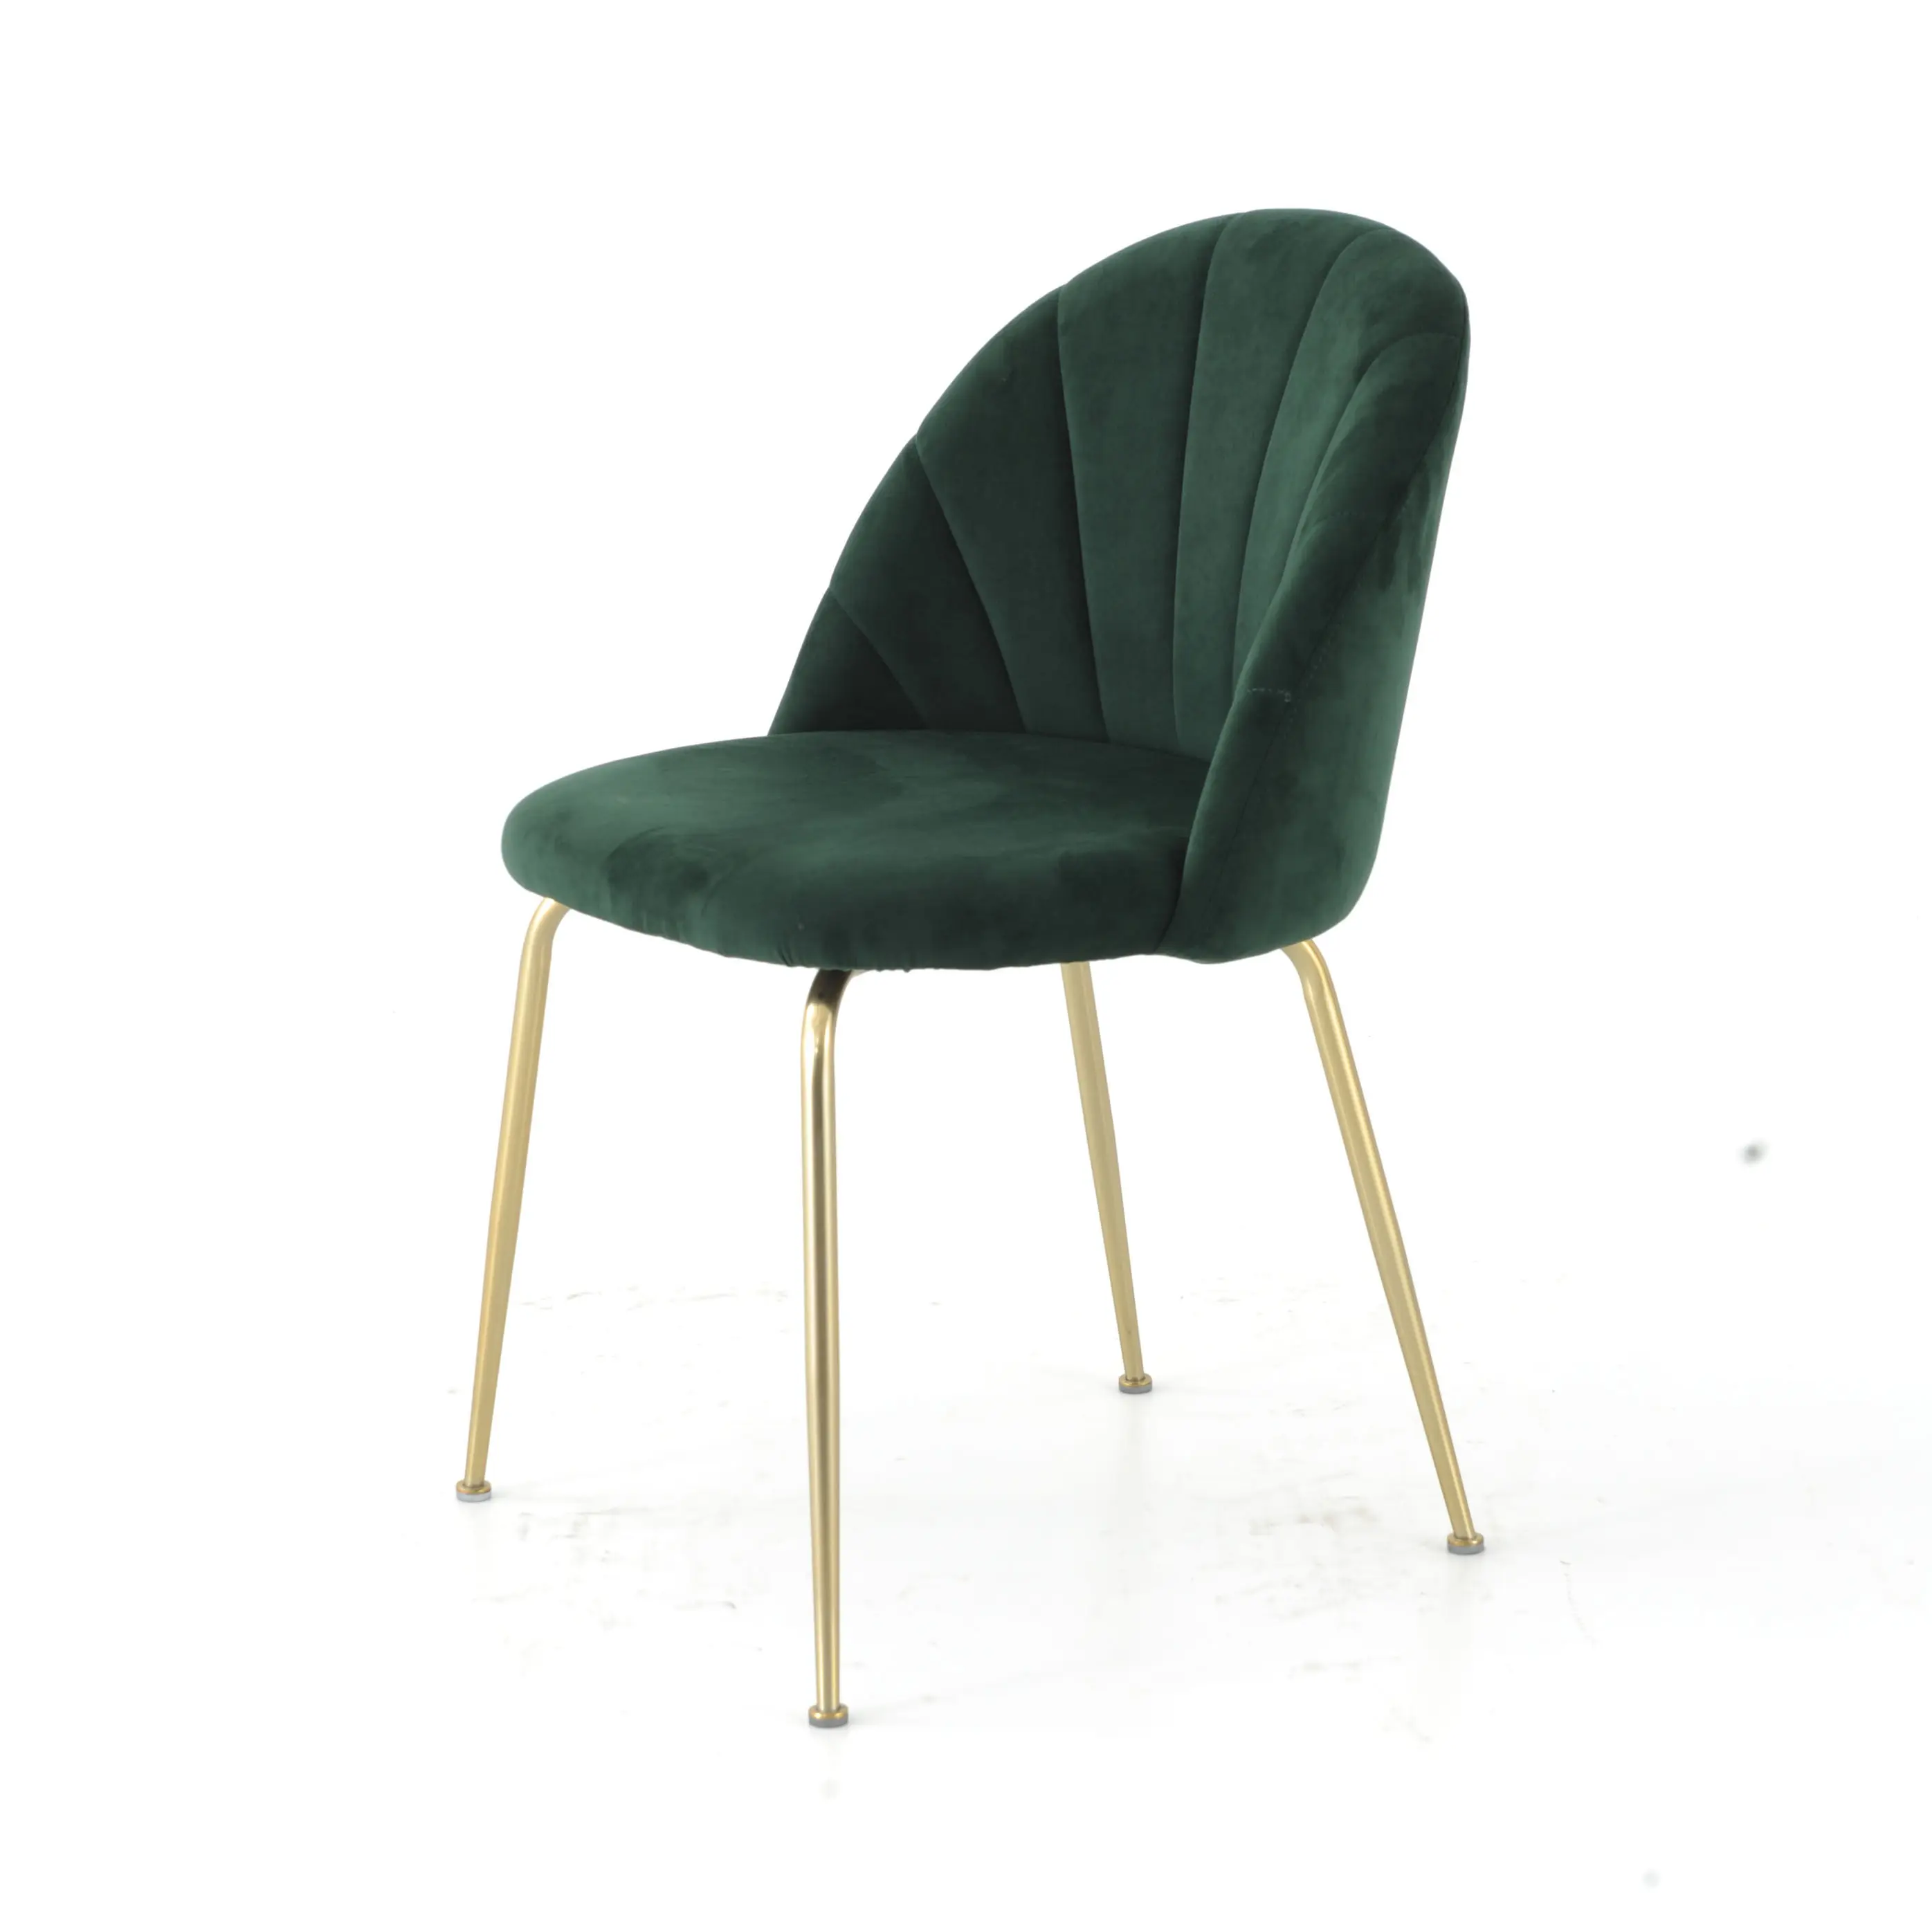 Golden脚New Type Nordic Dining Chair Modern Luxury Outdoor Living Room Restaurant Furniture Colorful Green Velvet Dining Cha